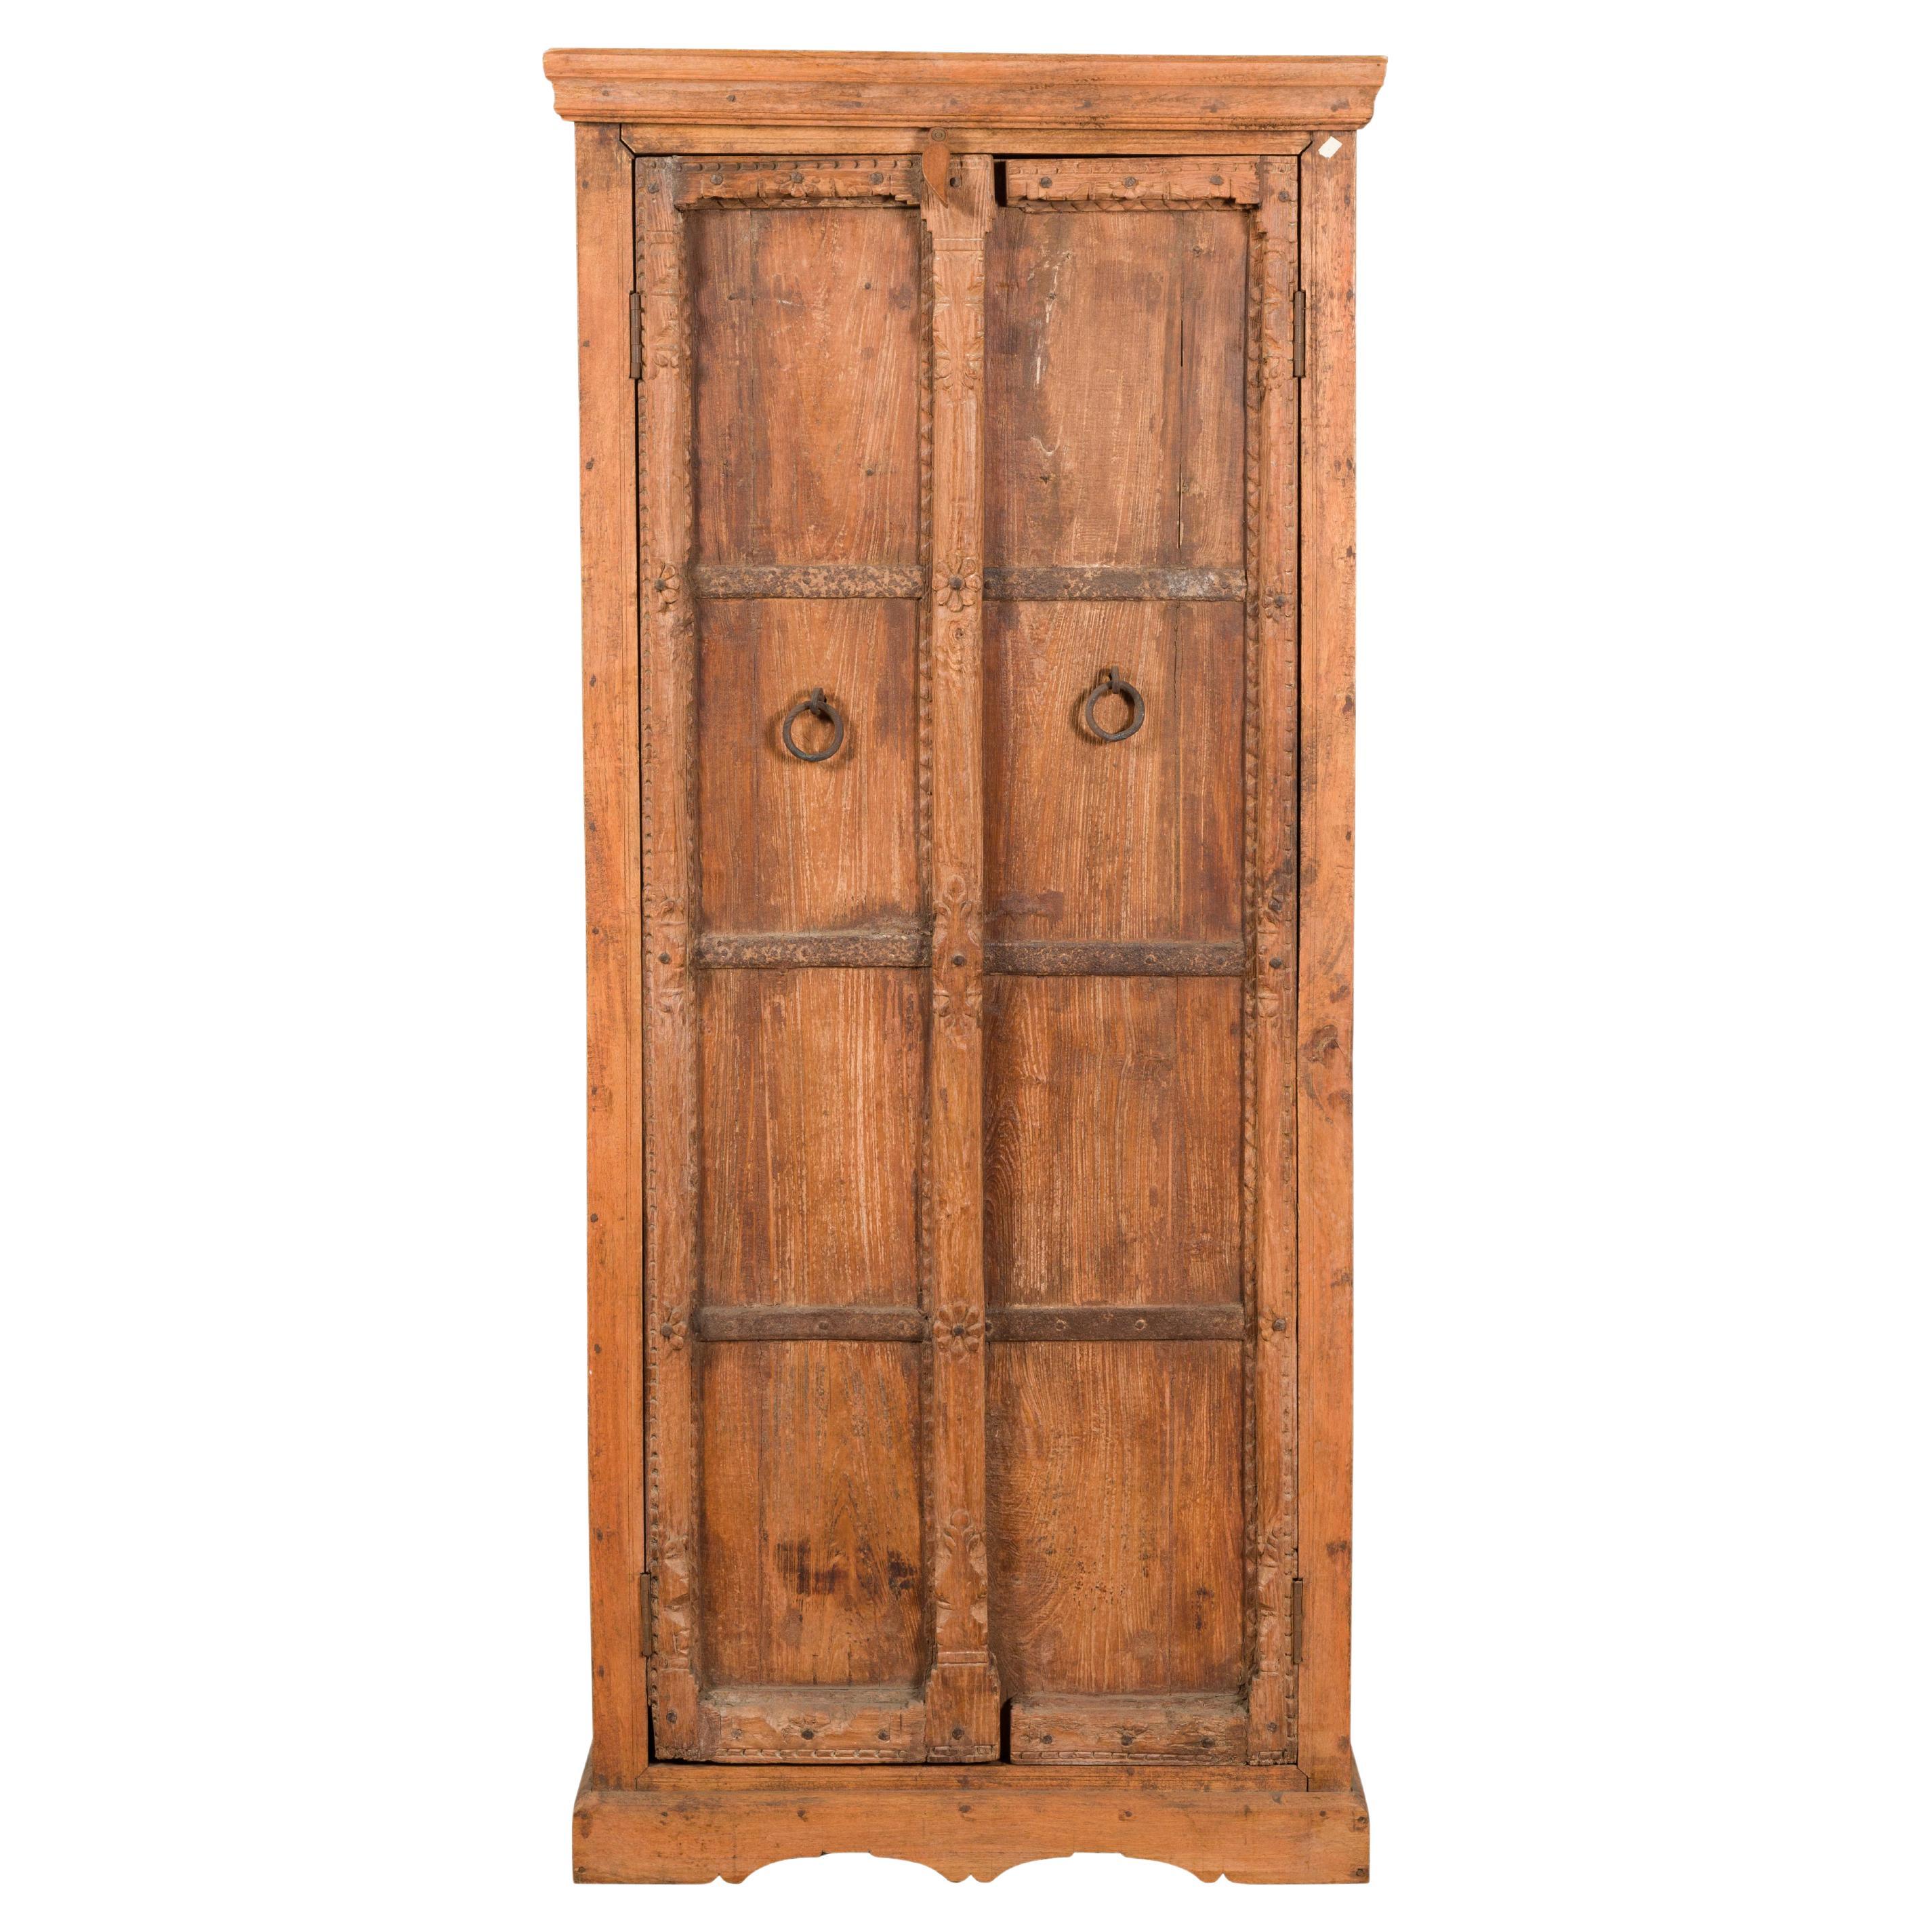 Mid 19th Century Indian Cabinet with Hand-Carved Floral Motifs and Iron Hardware For Sale